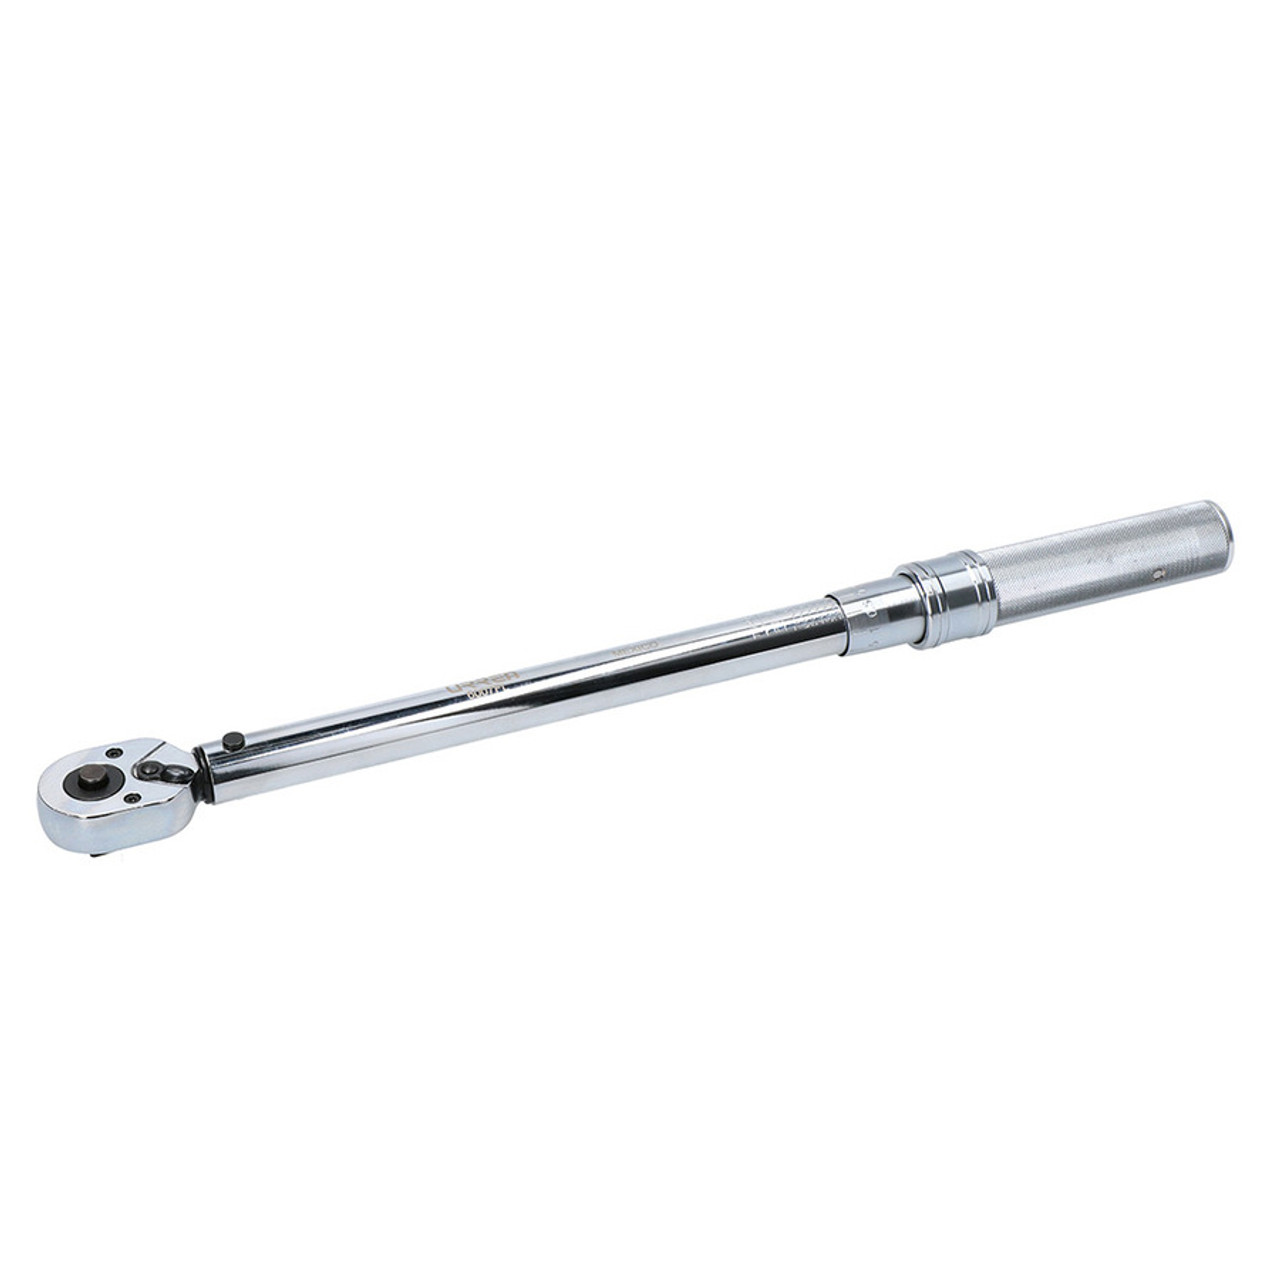 Urrea 6025FLClick torque Wrench One Scale